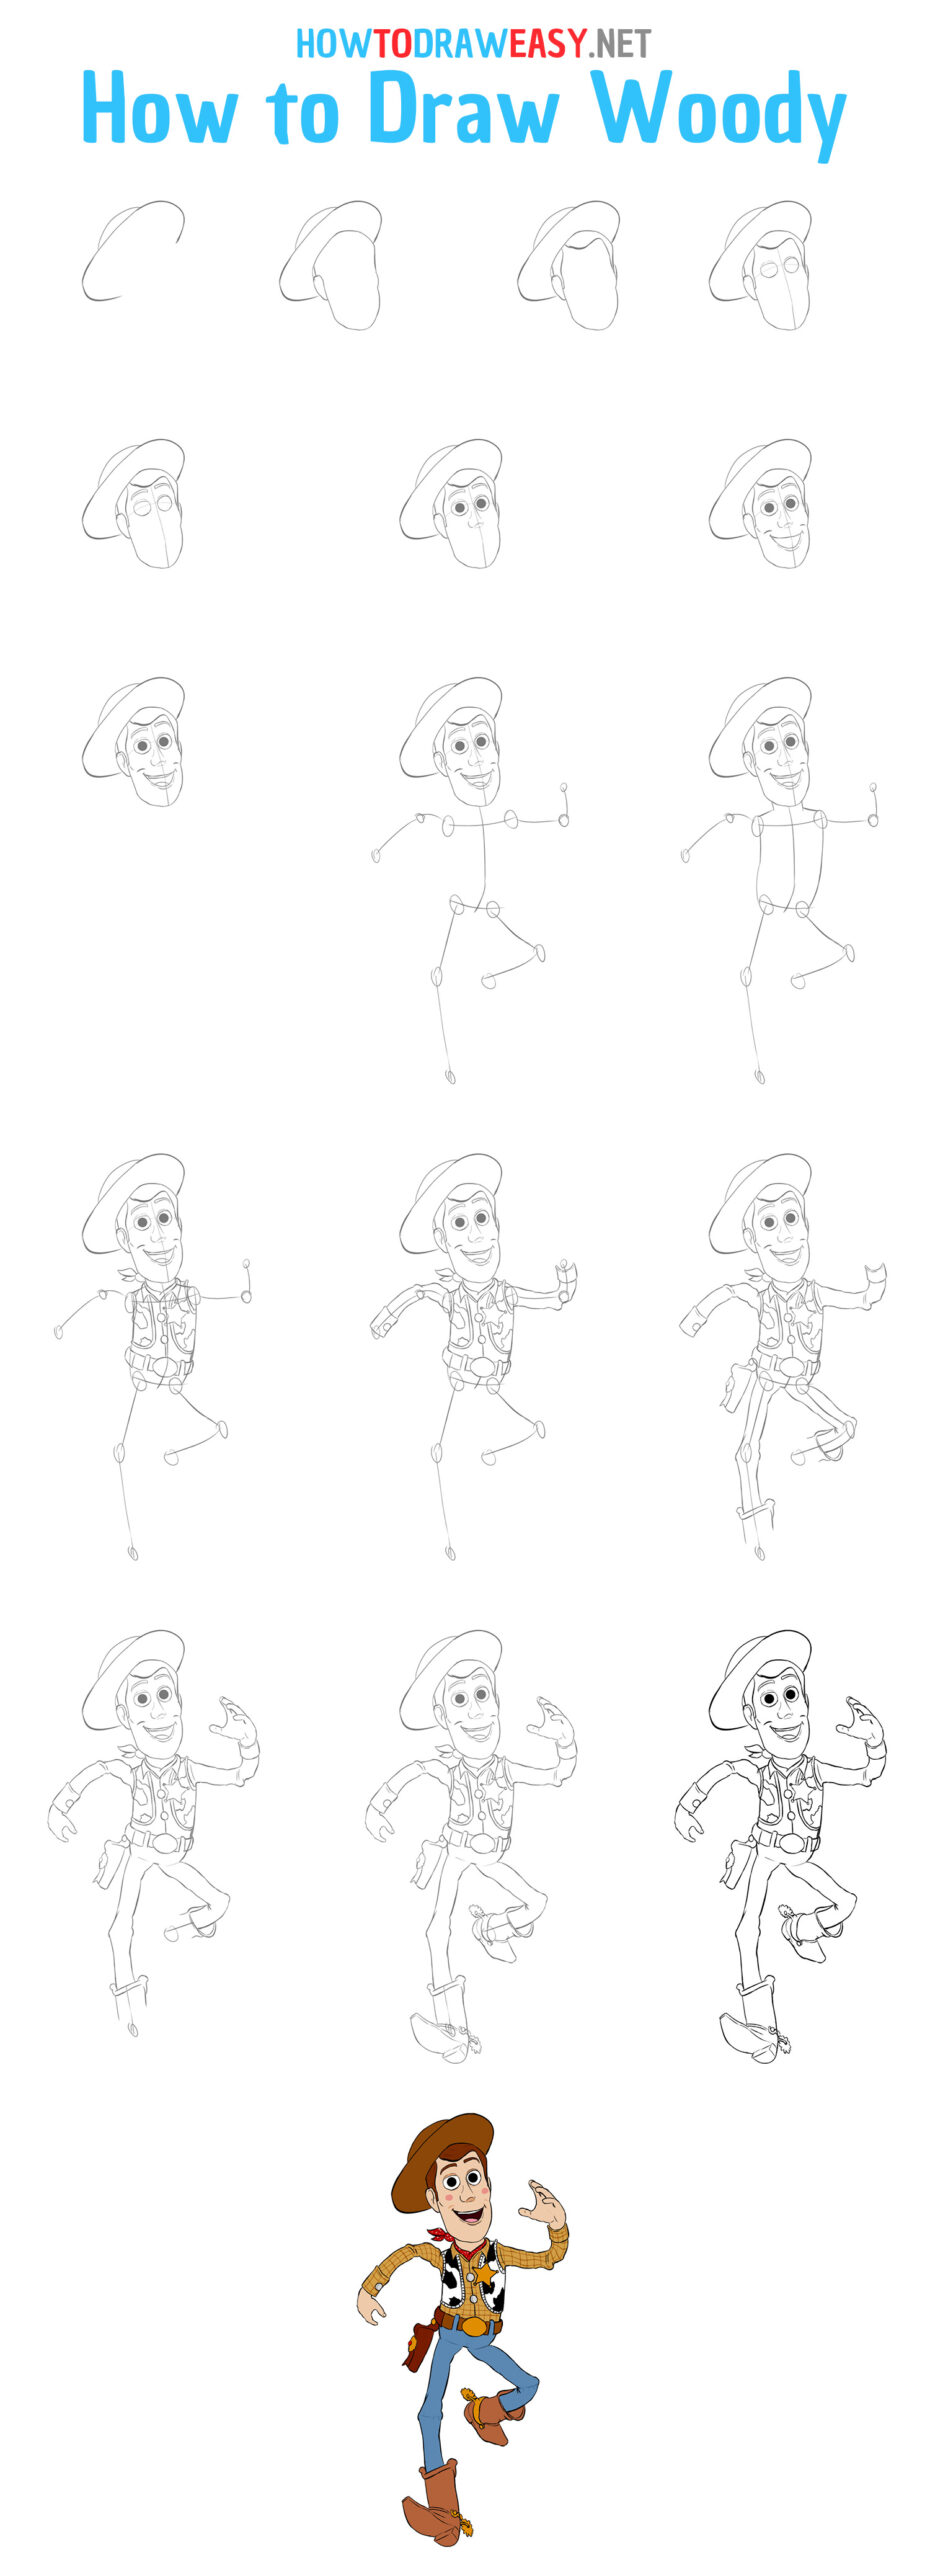 How to Draw Woody Step by Step